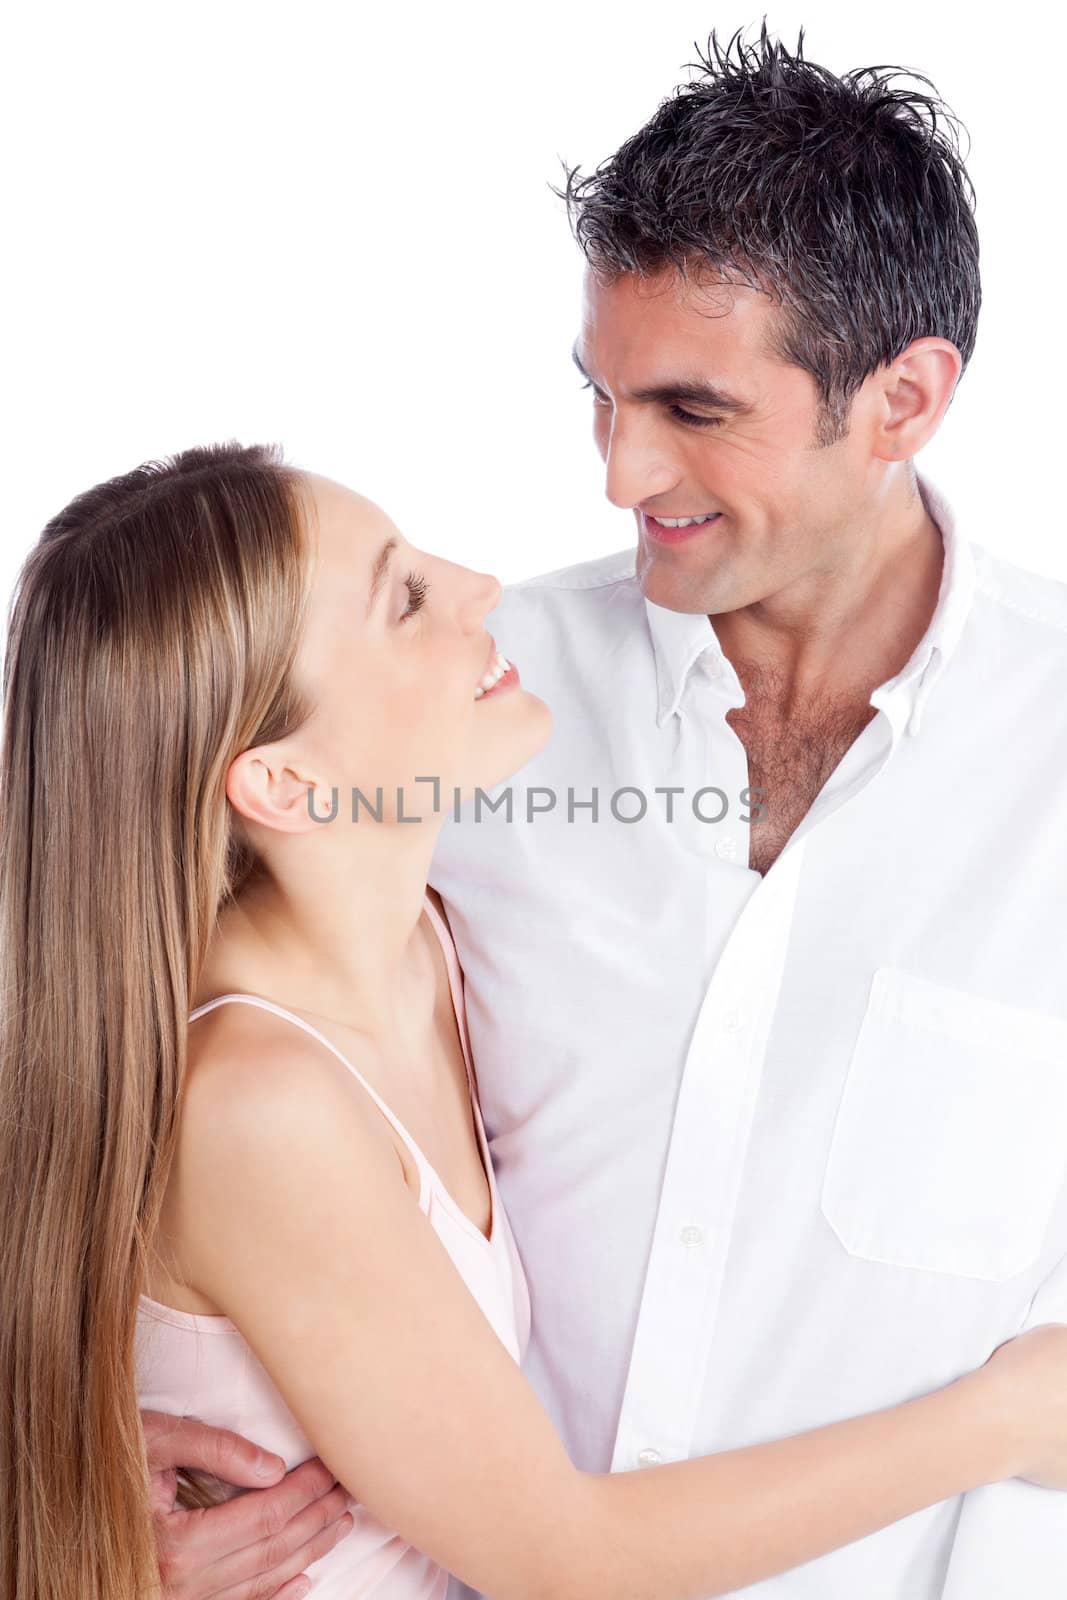 Portrait of young couple embracing isolated on white background.